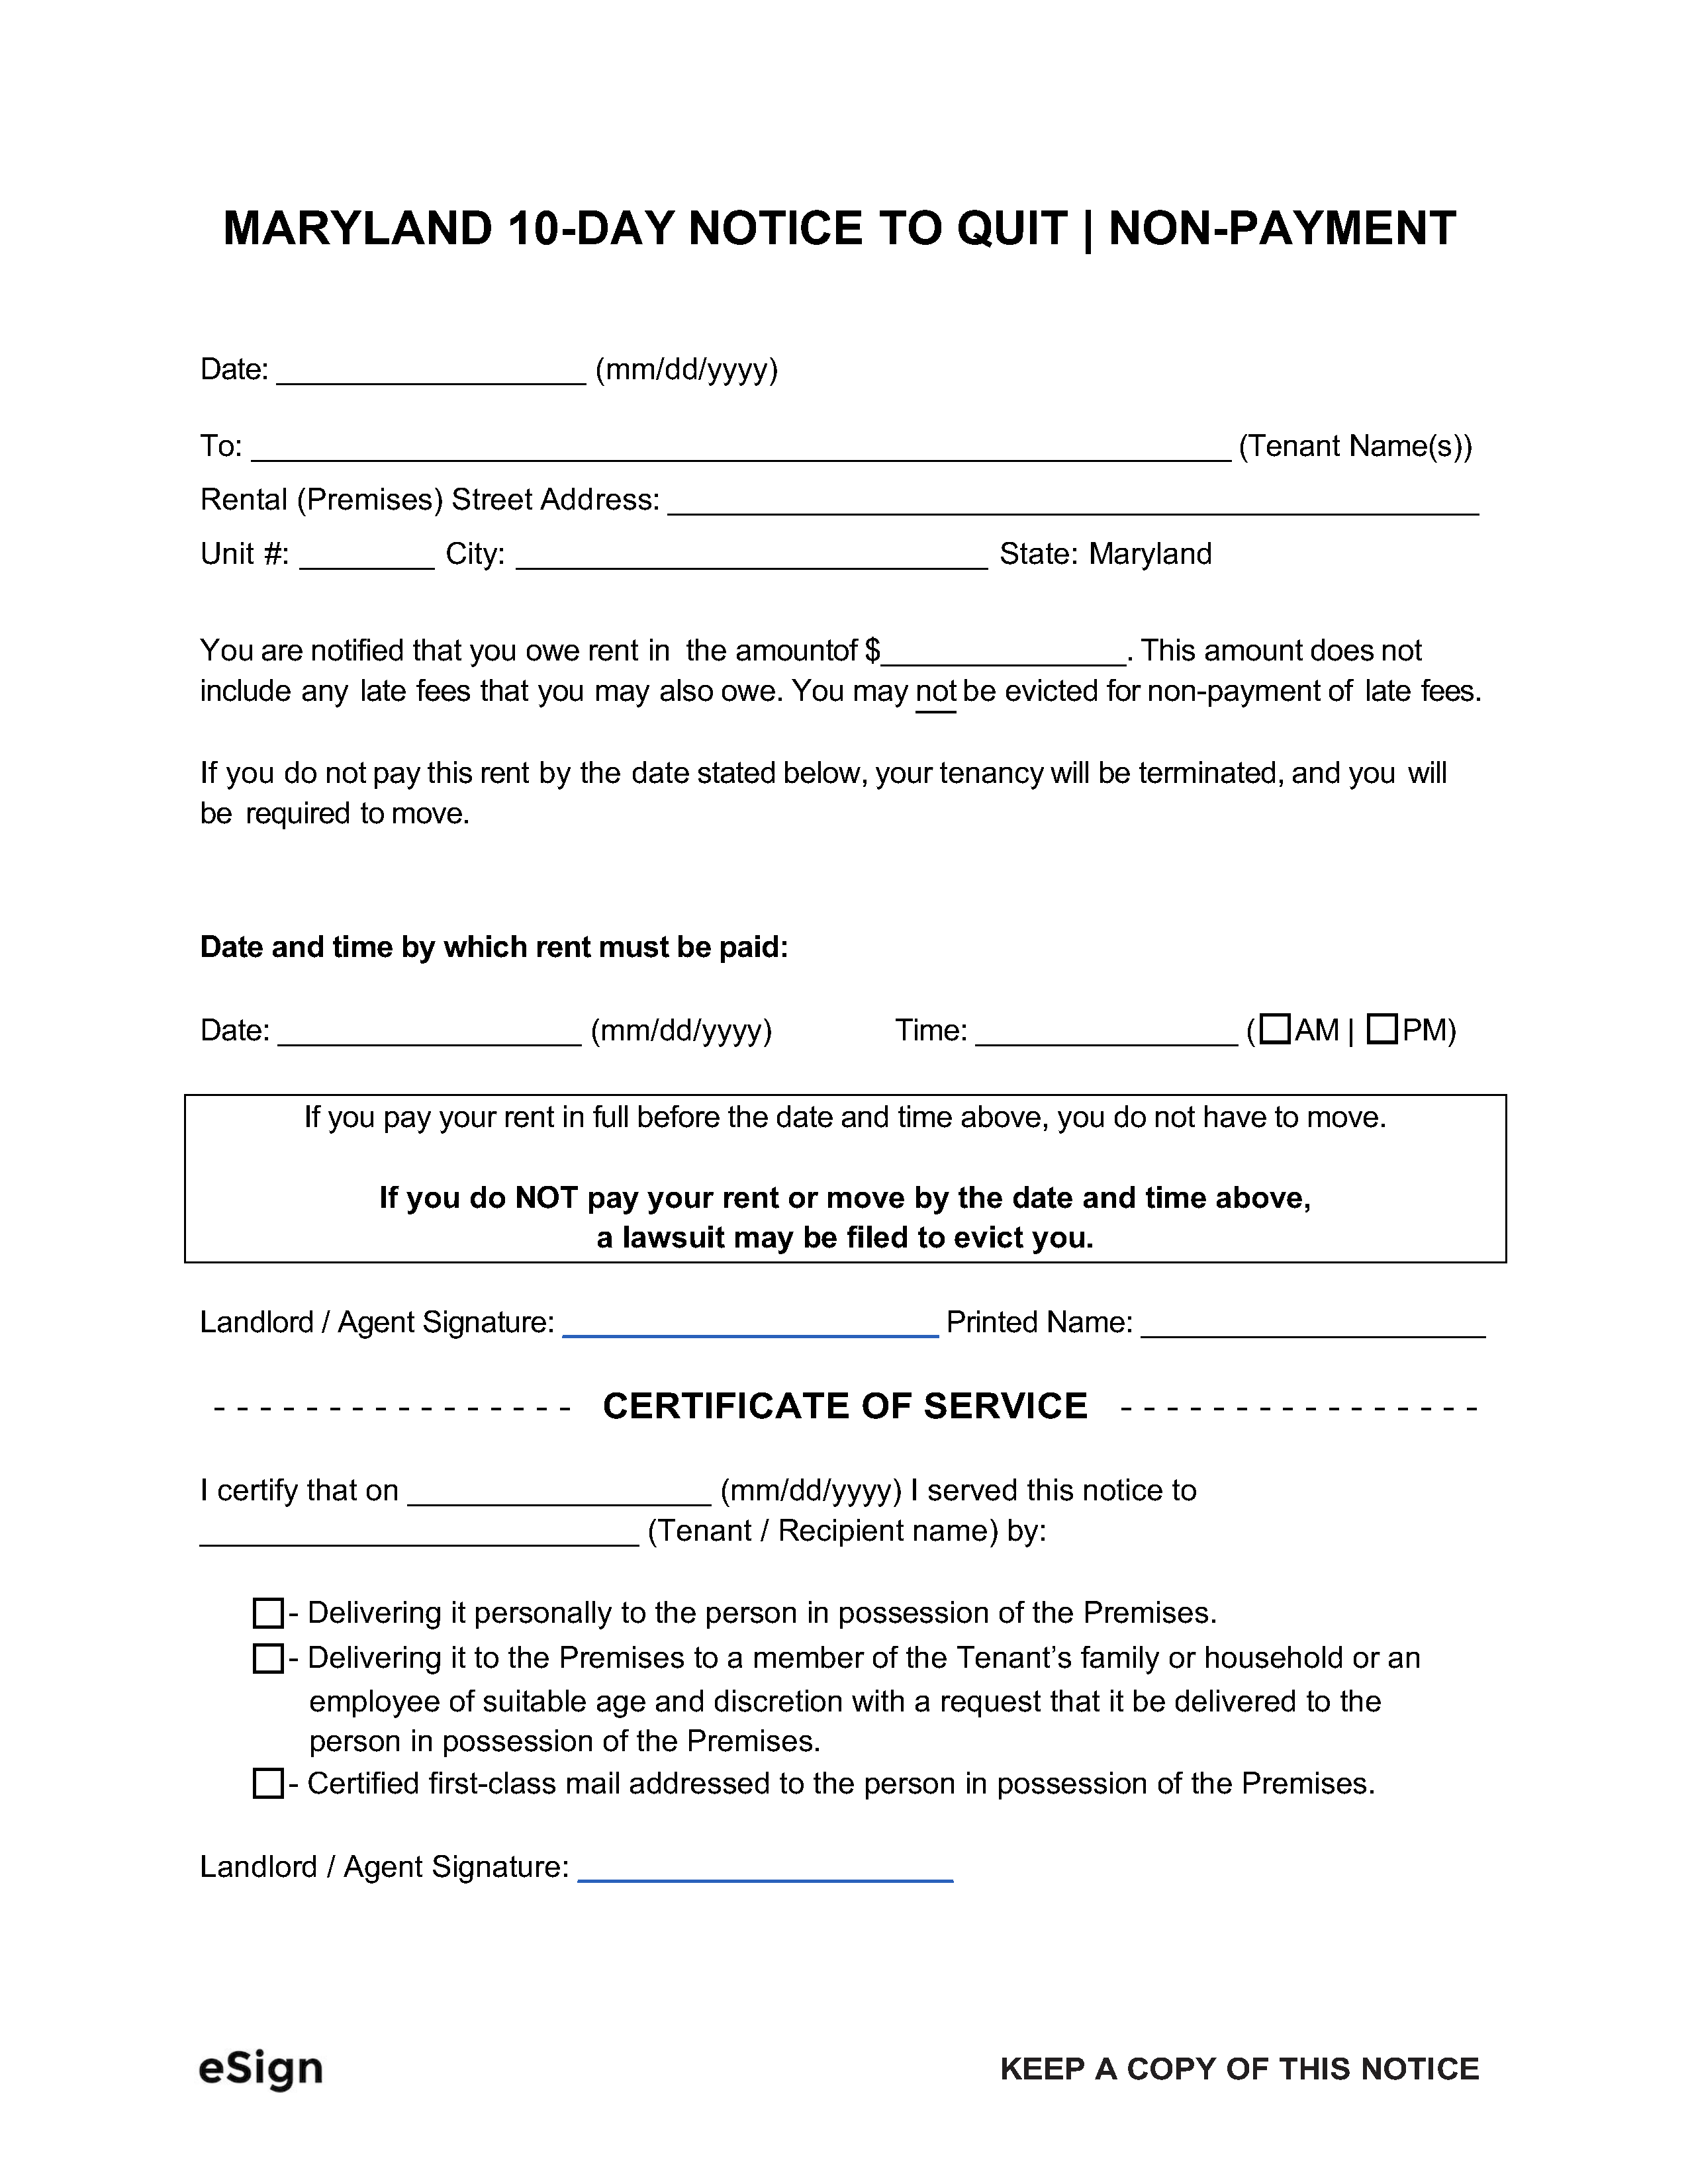 Free Maryland Eviction Notice Templates (4) PDF Word